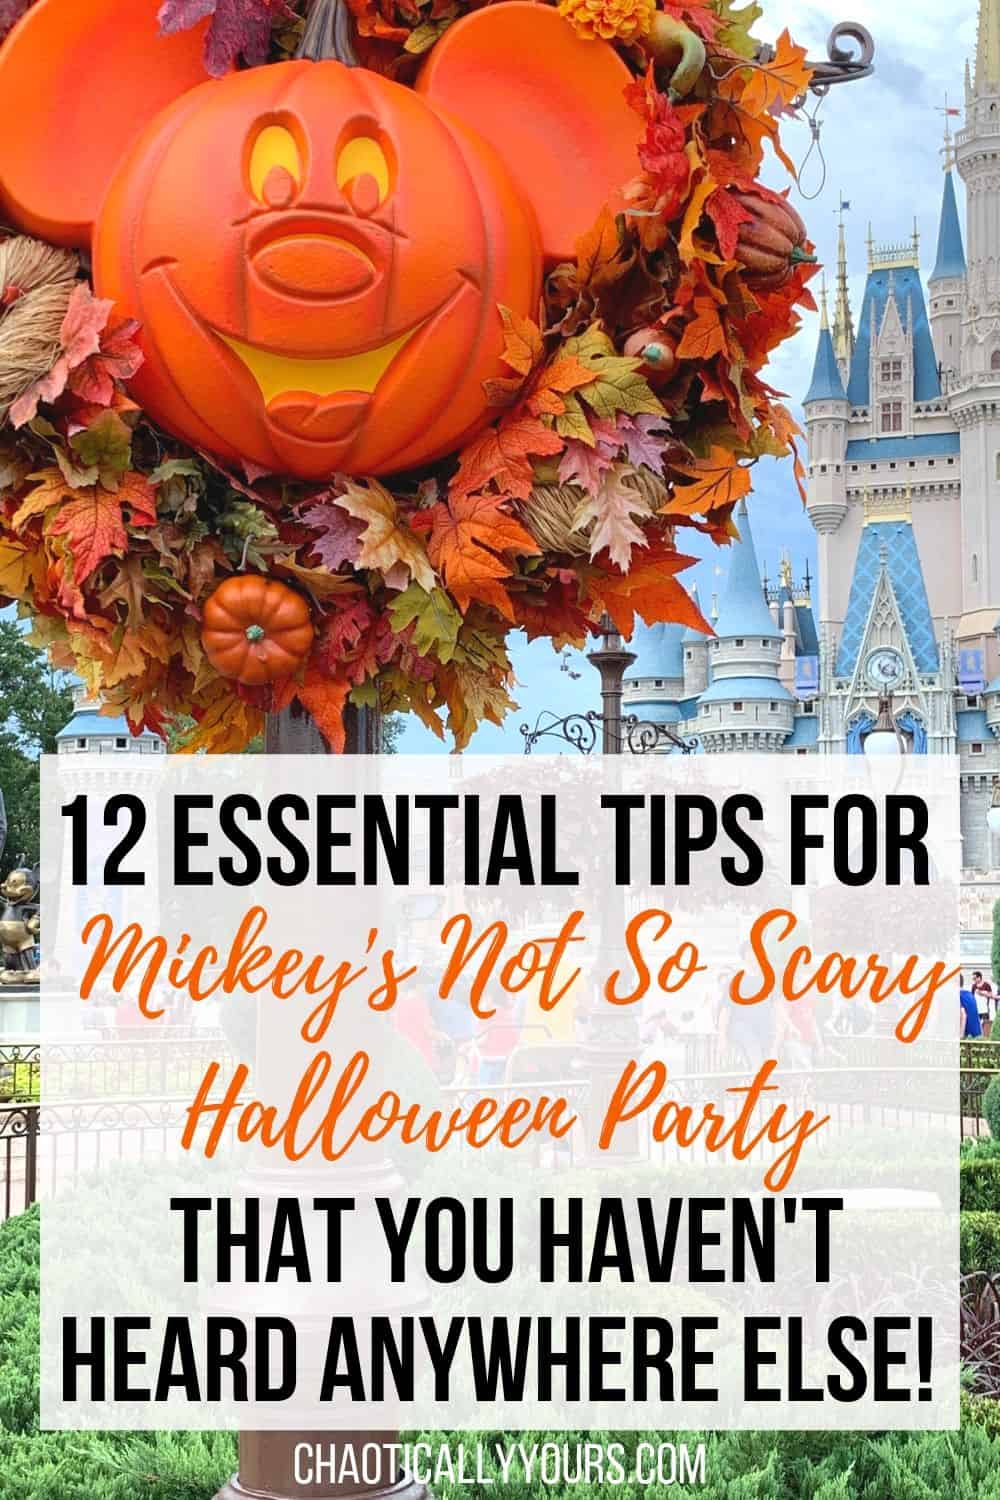 12 Essential Tips for Mickey's Not So Scary Halloween Party THat you Haven't heard anywhere else!